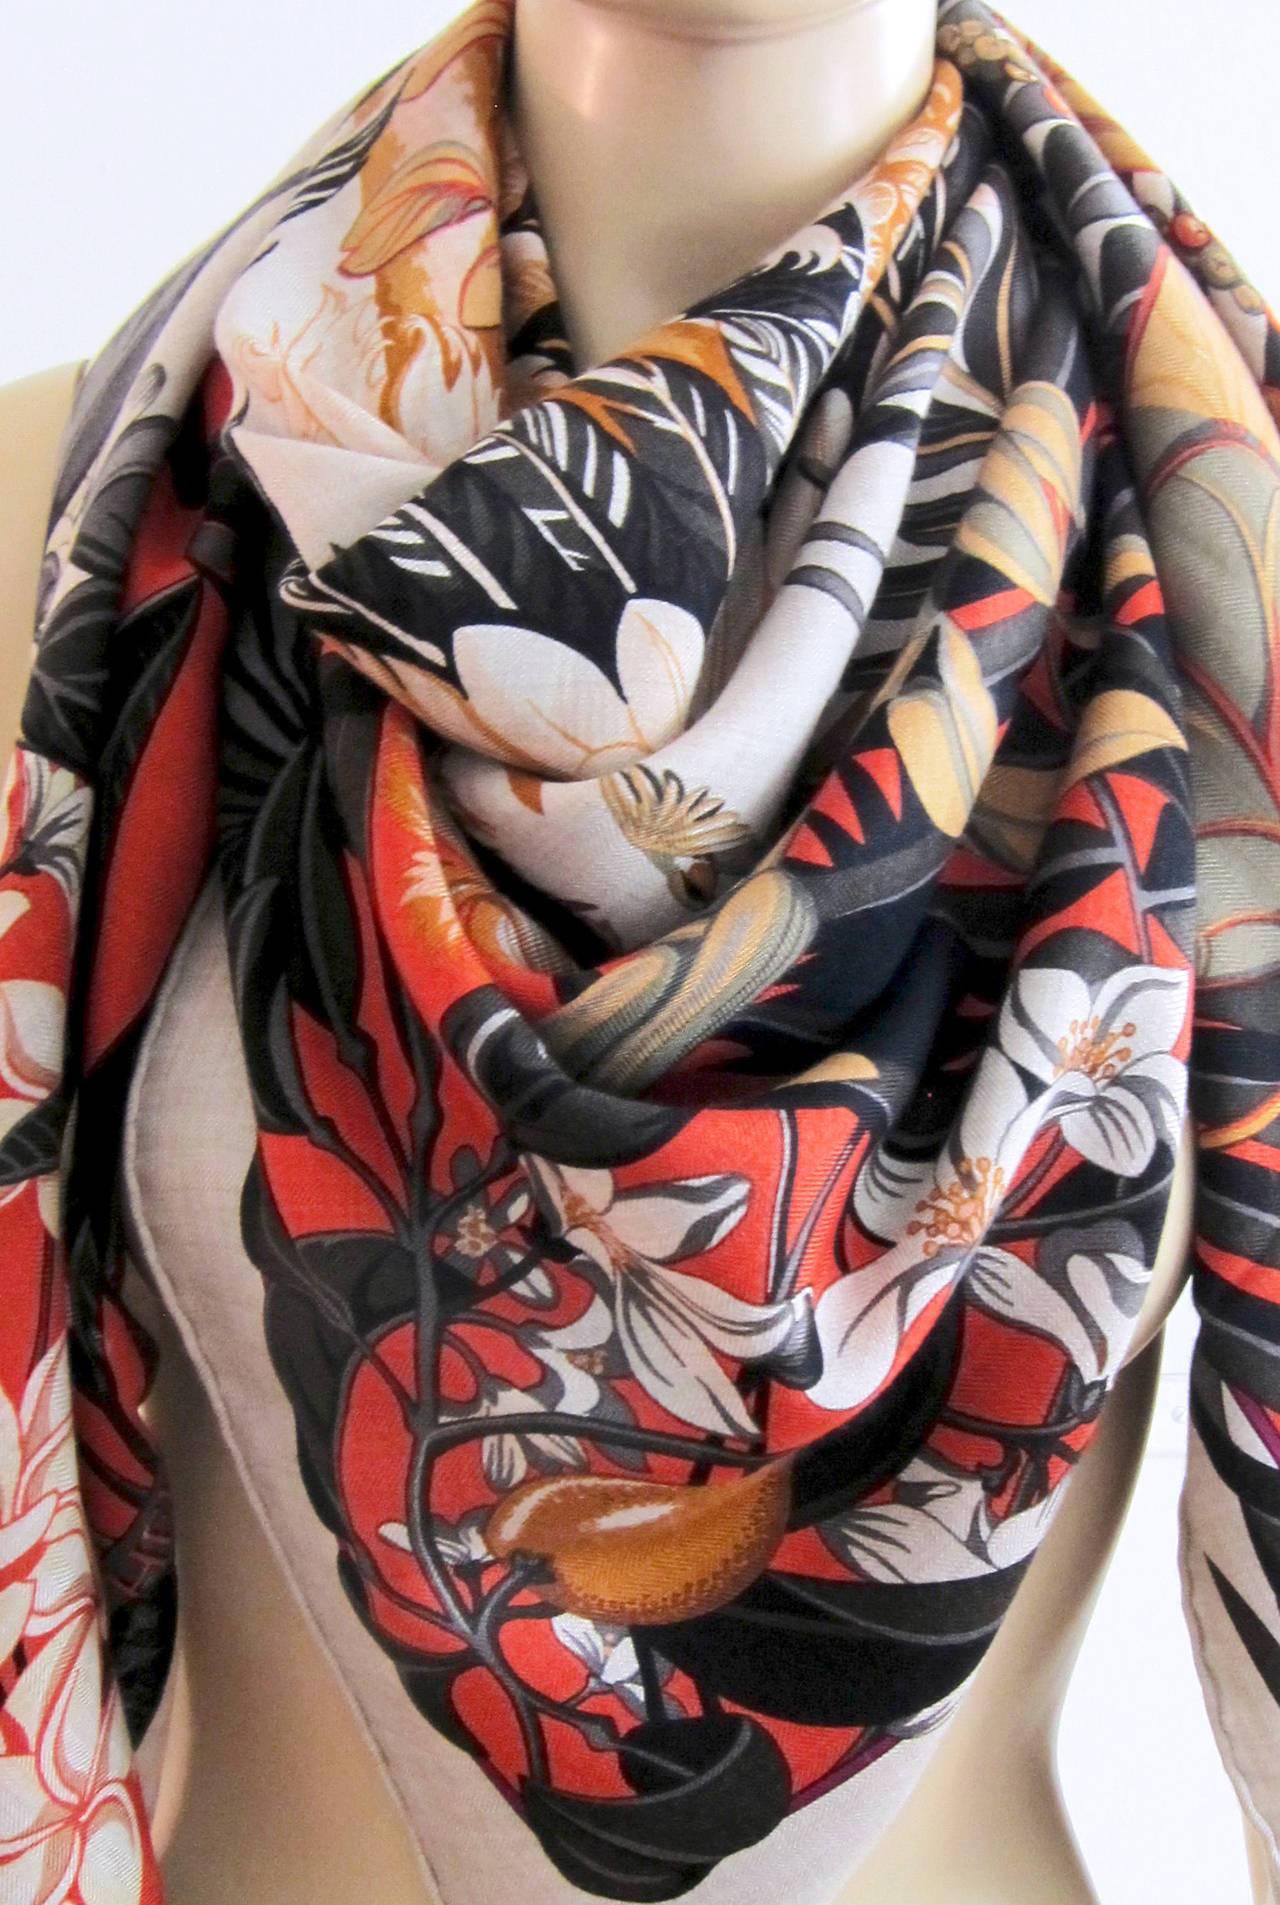 Hermes Flamingo Party Cashmere Silk Shawl Scarf GM Naturel Grail
Brand New in Box.  Store Fresh.  Pristine Condition. 
Giant 140cm x 140cm square shawl made of cashmere silk.
Perfect and impressive gift! 
Comes with Hermes tag, Hermes box and